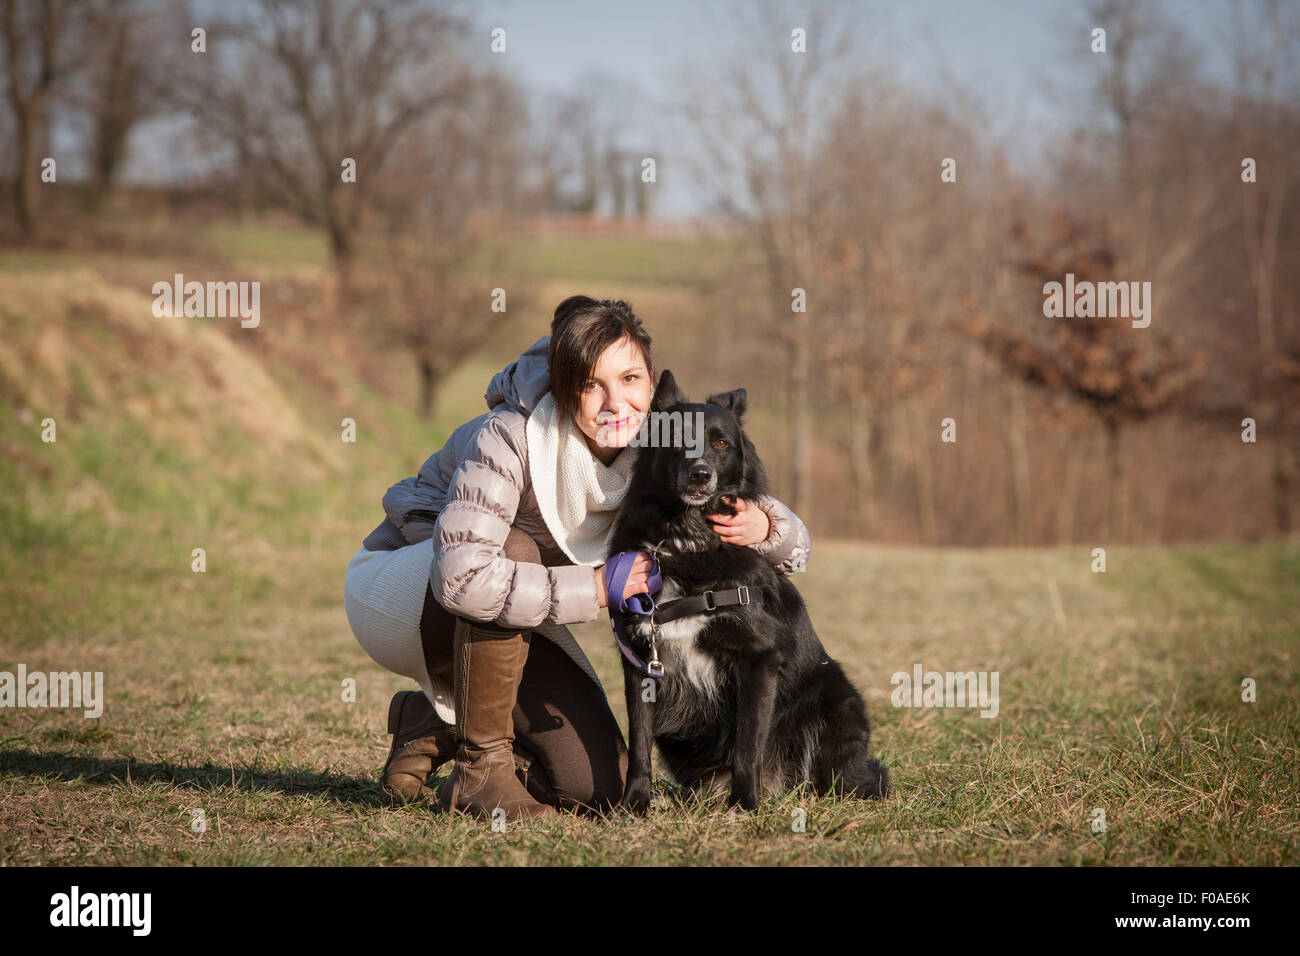 Portrait of mid adult woman kneeling with her dog in field Stock Photo